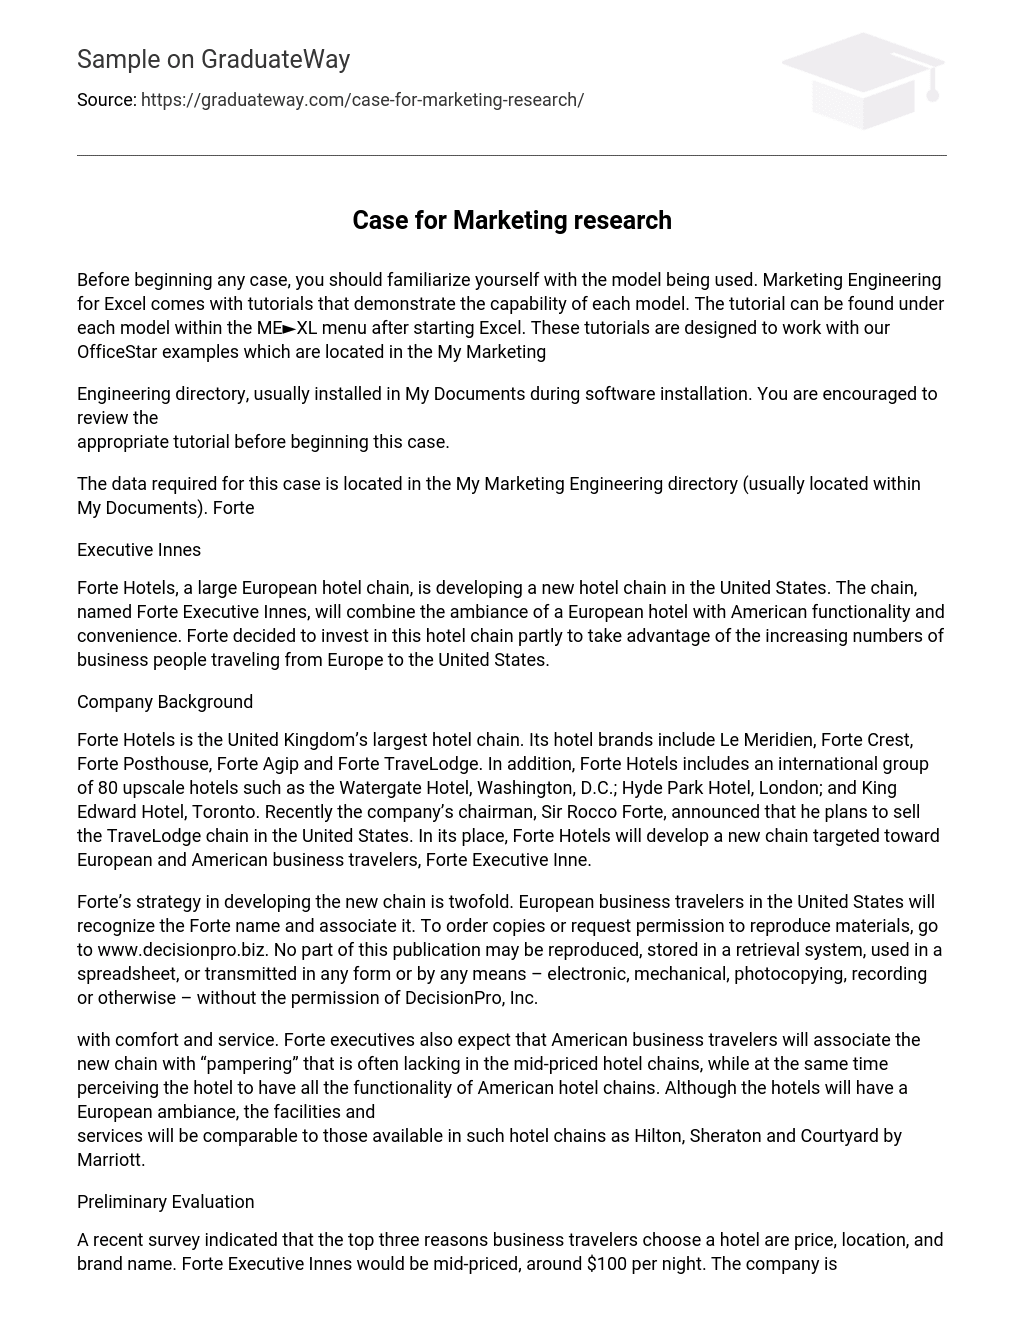 Case for Marketing research